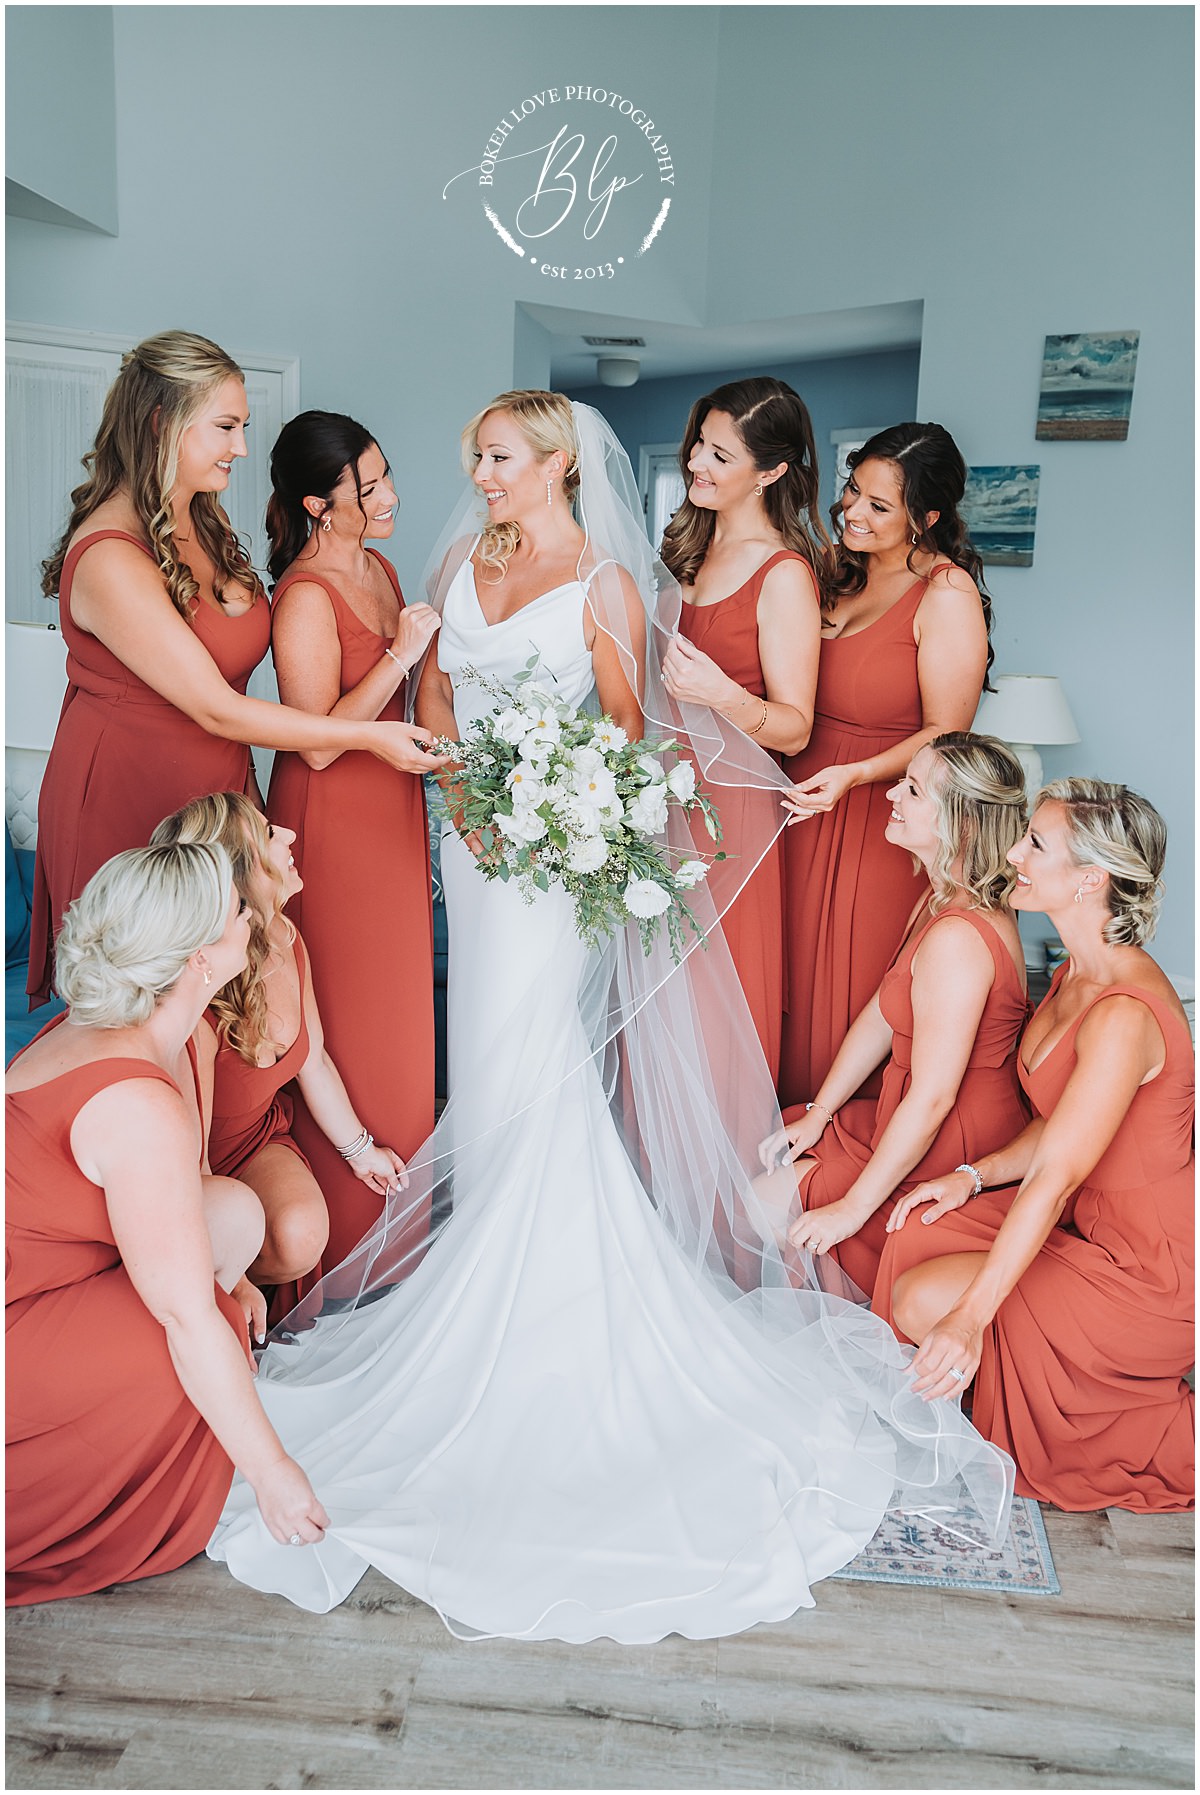 Bokeh Love Photography, Deauville Inn Wedding, bride getting ready with bridesmaids